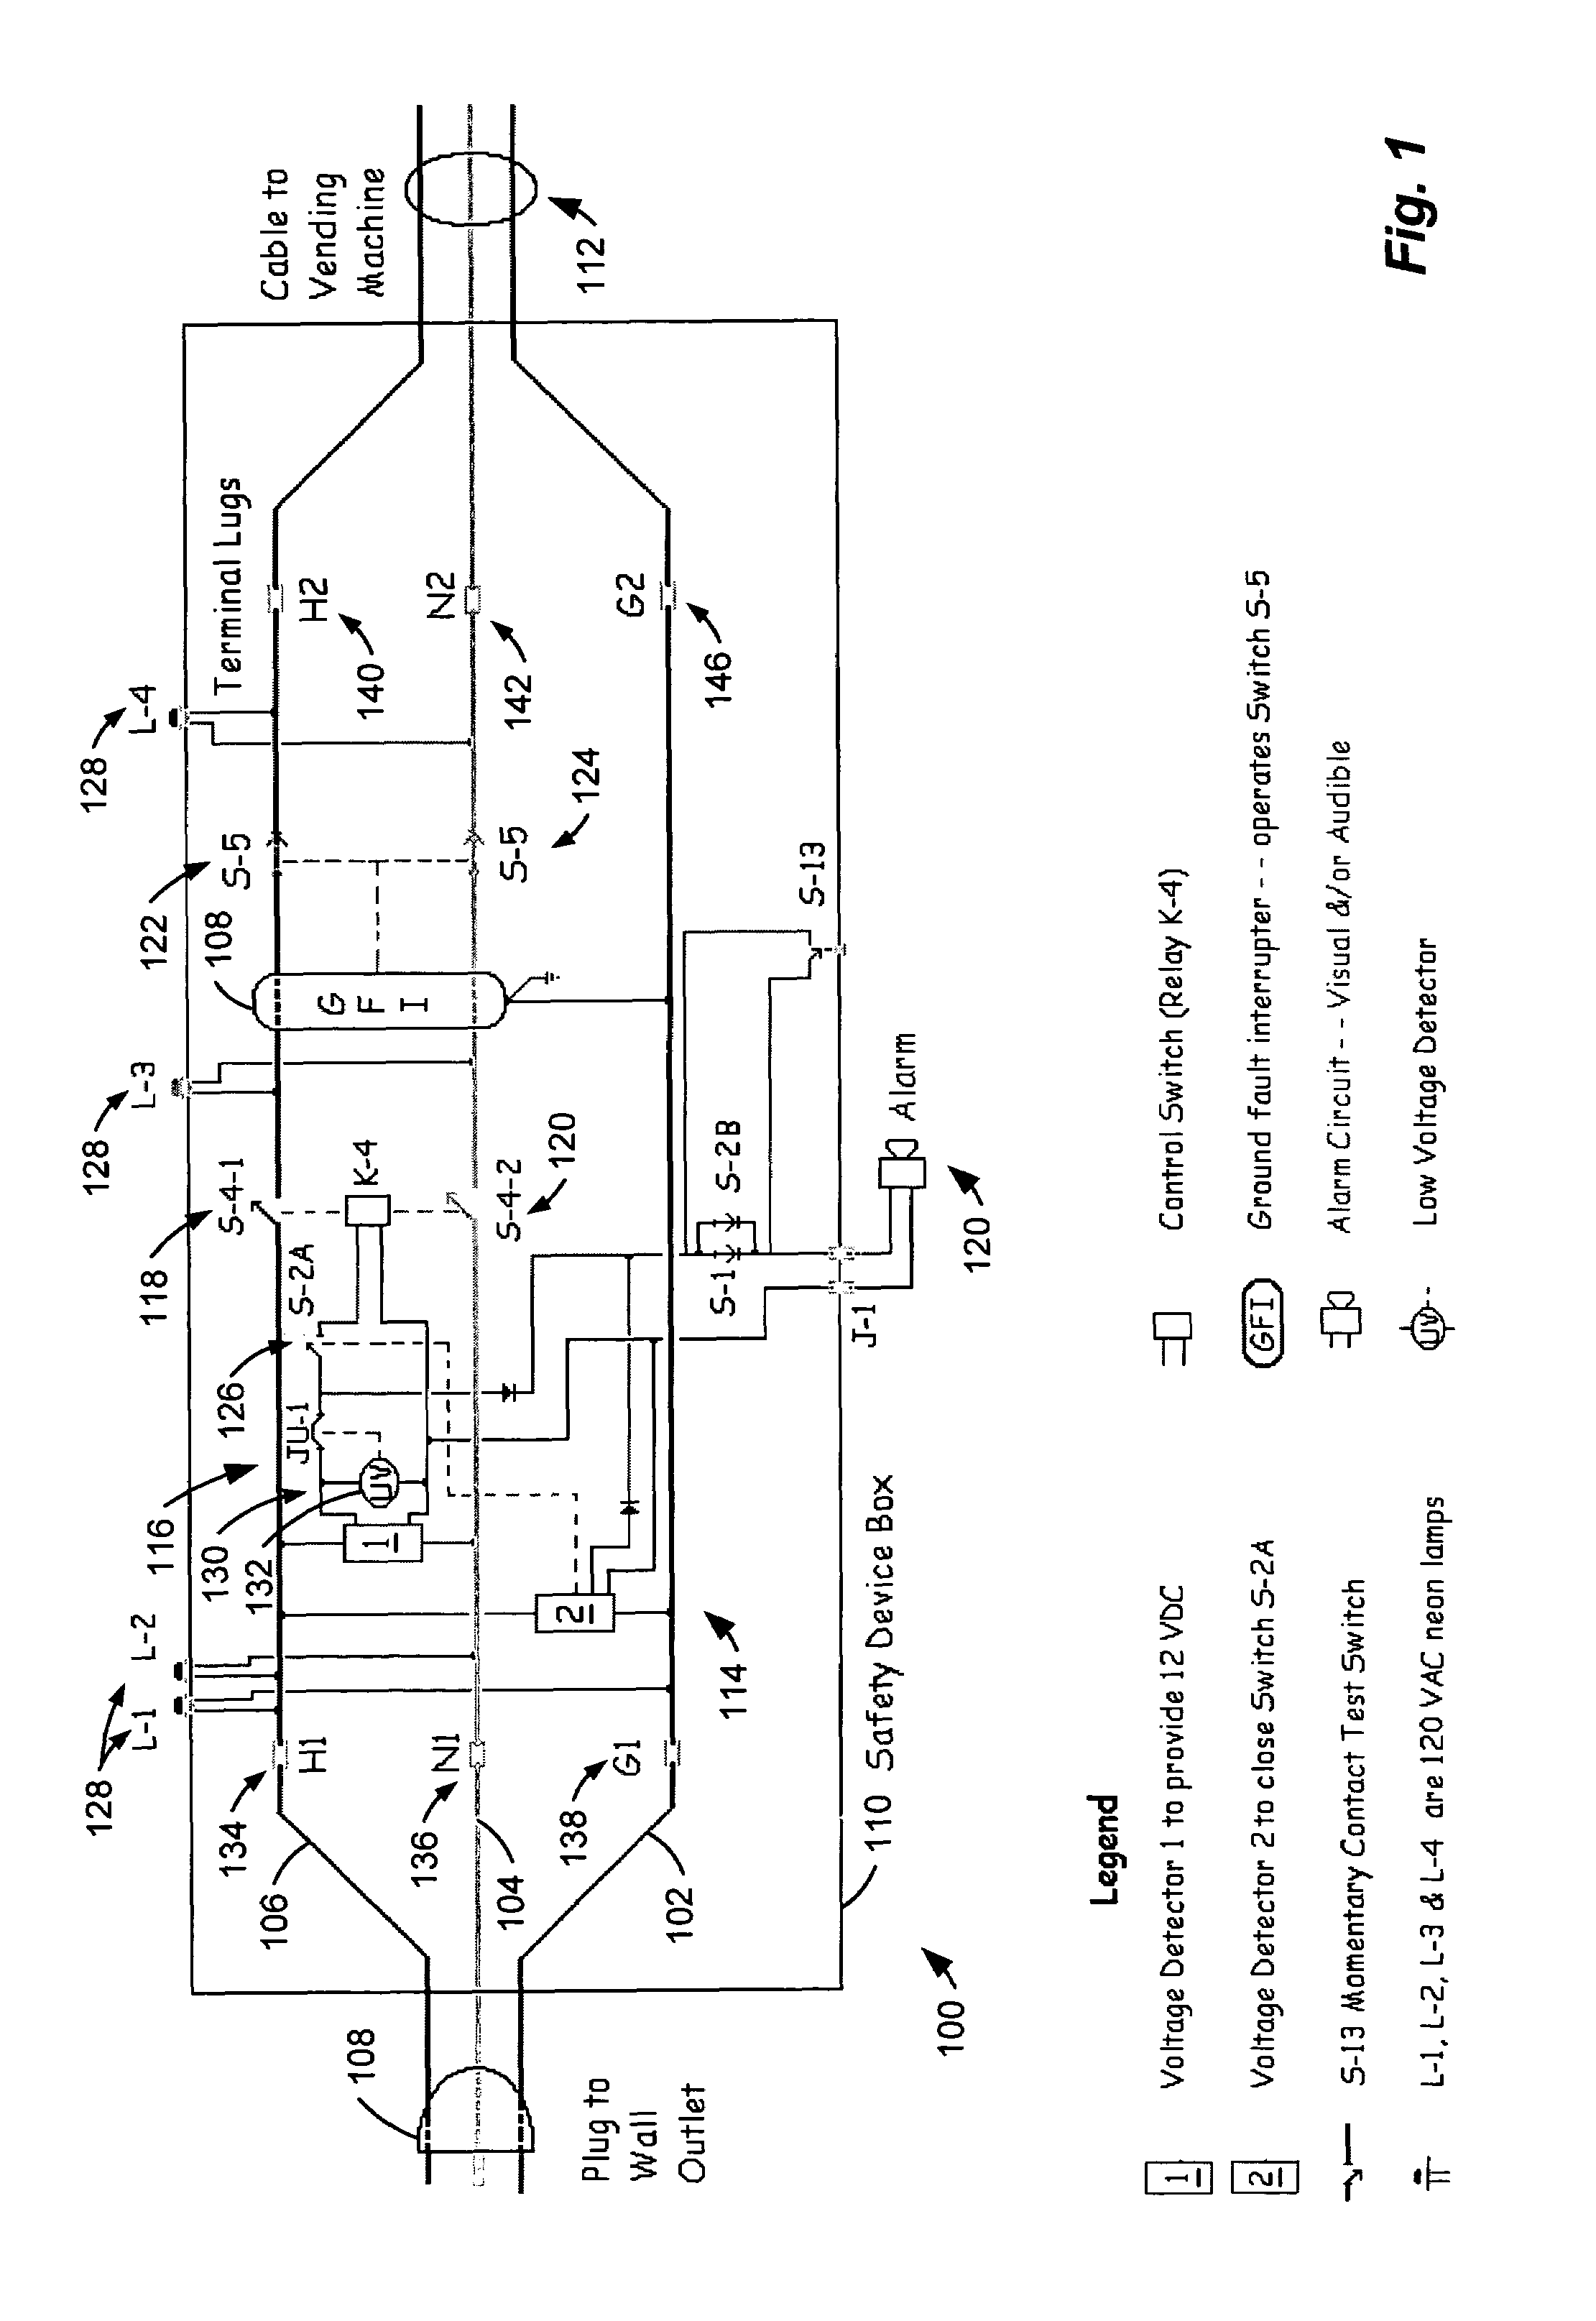 Safety device for prevention of electrical shocks